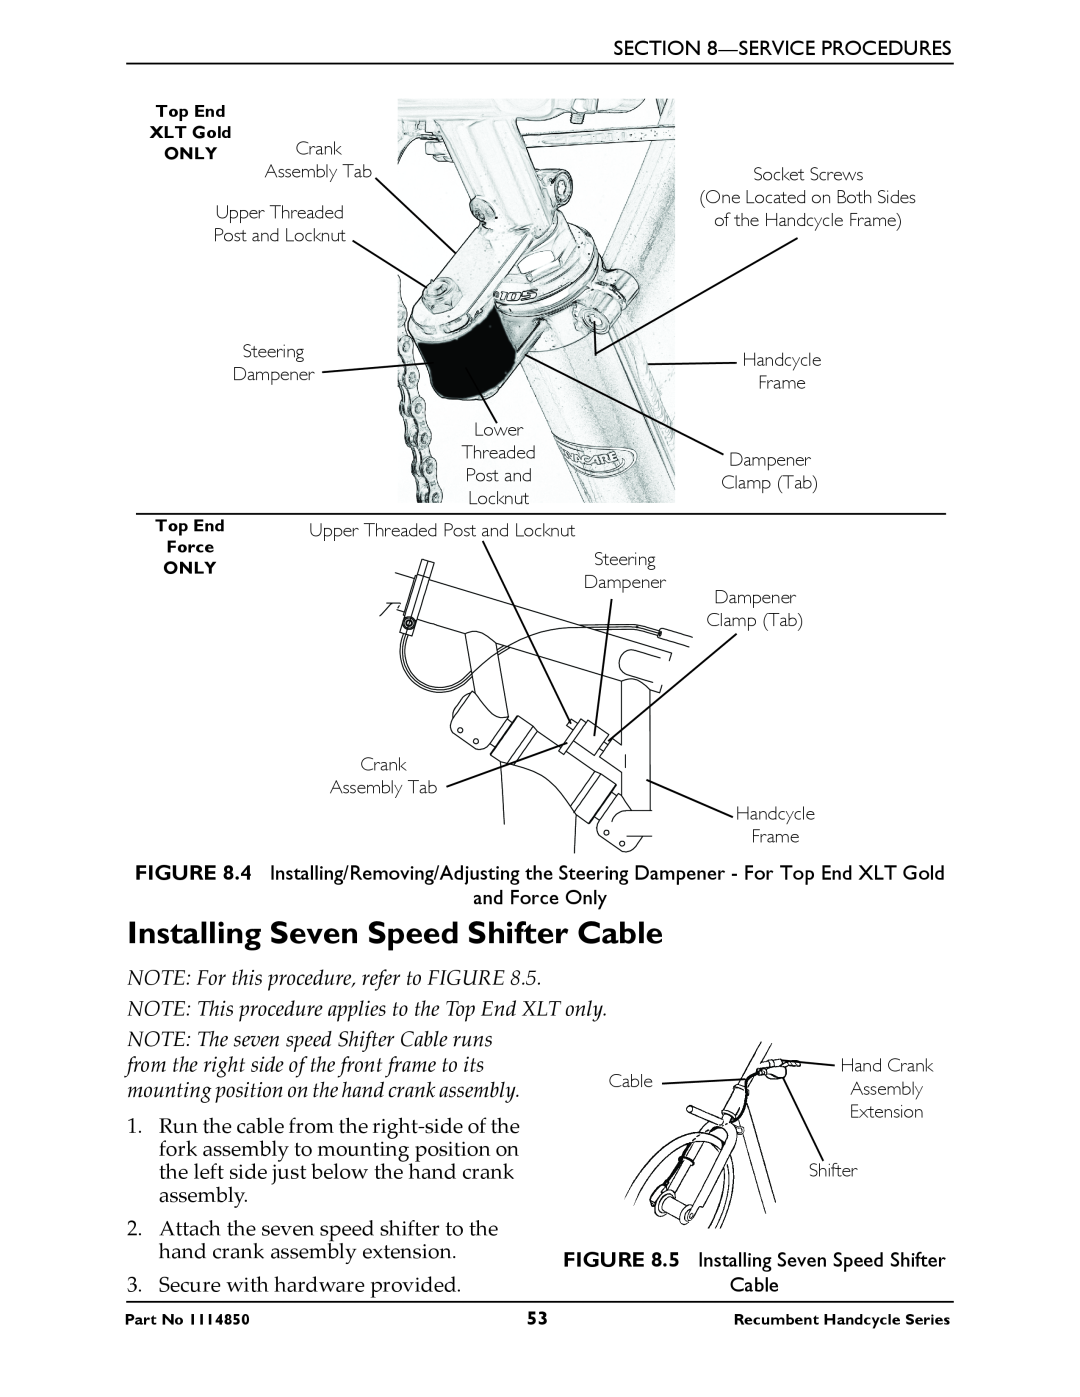 Invacare Force, XLTPRO, XLT Jr Installing Seven Speed Shifter Cable, NOTE For this procedure, refer to FIGURE, assembly 